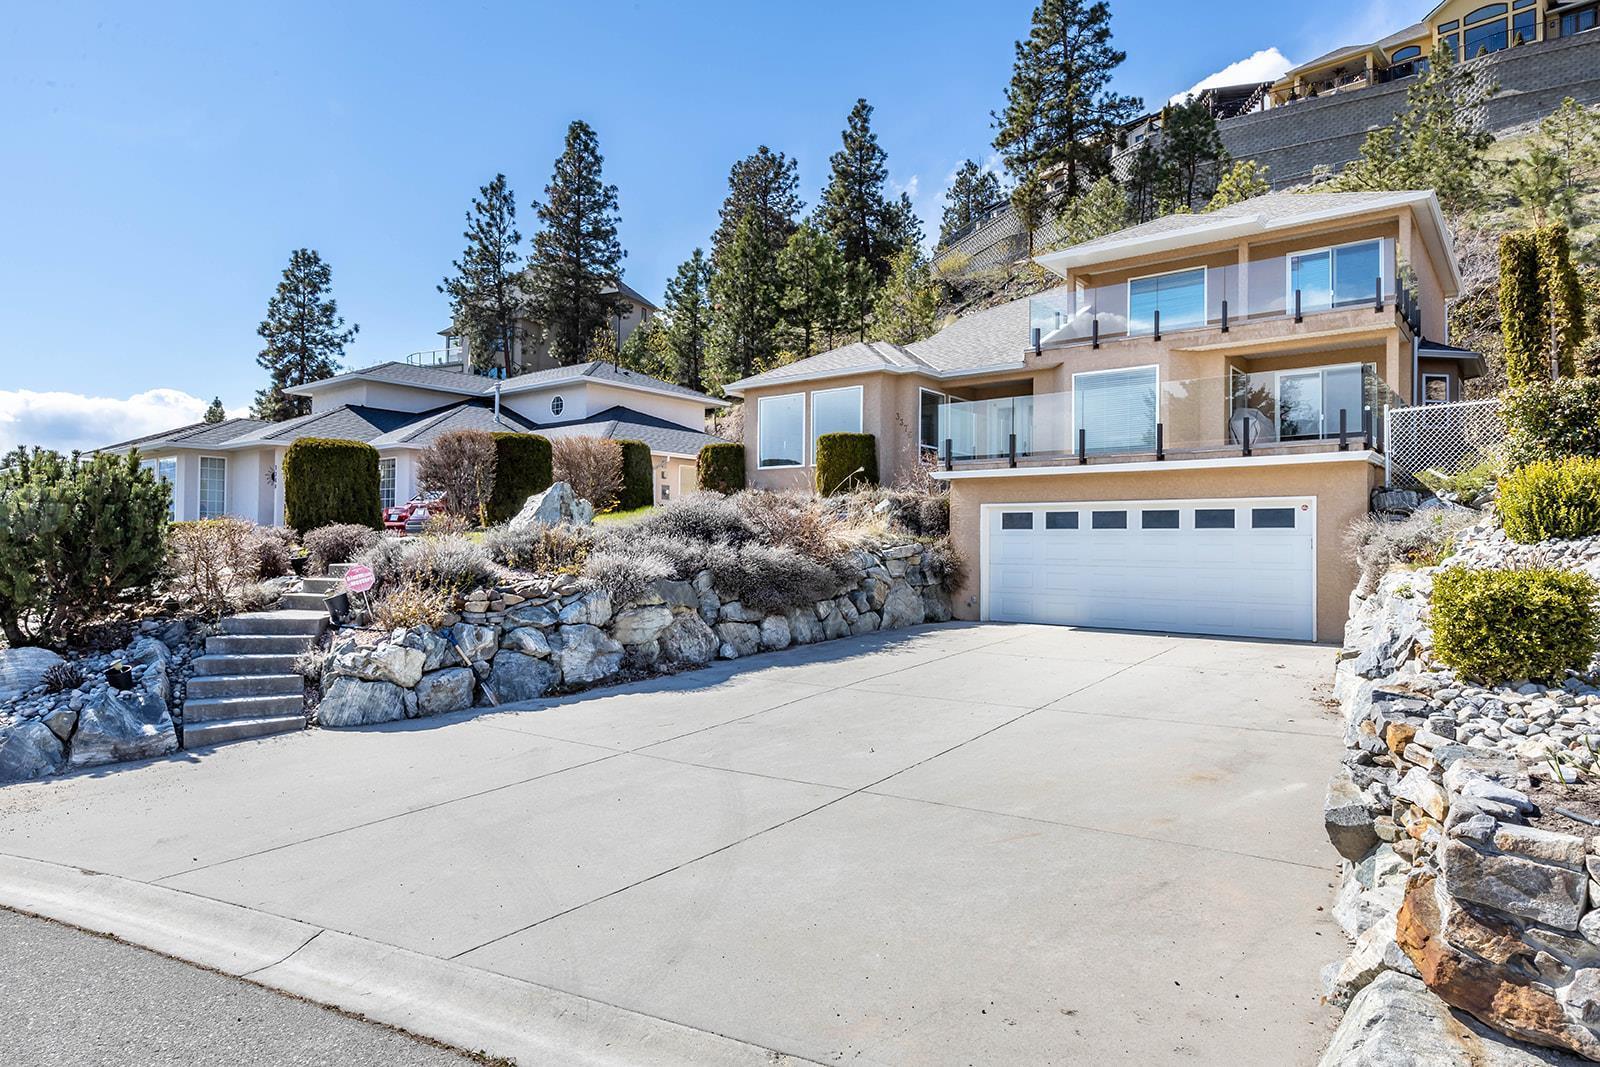      3376 Chancellor Place  , West Kelowna, Central Okanagan,  ;  Listing Number: MLS 10273955